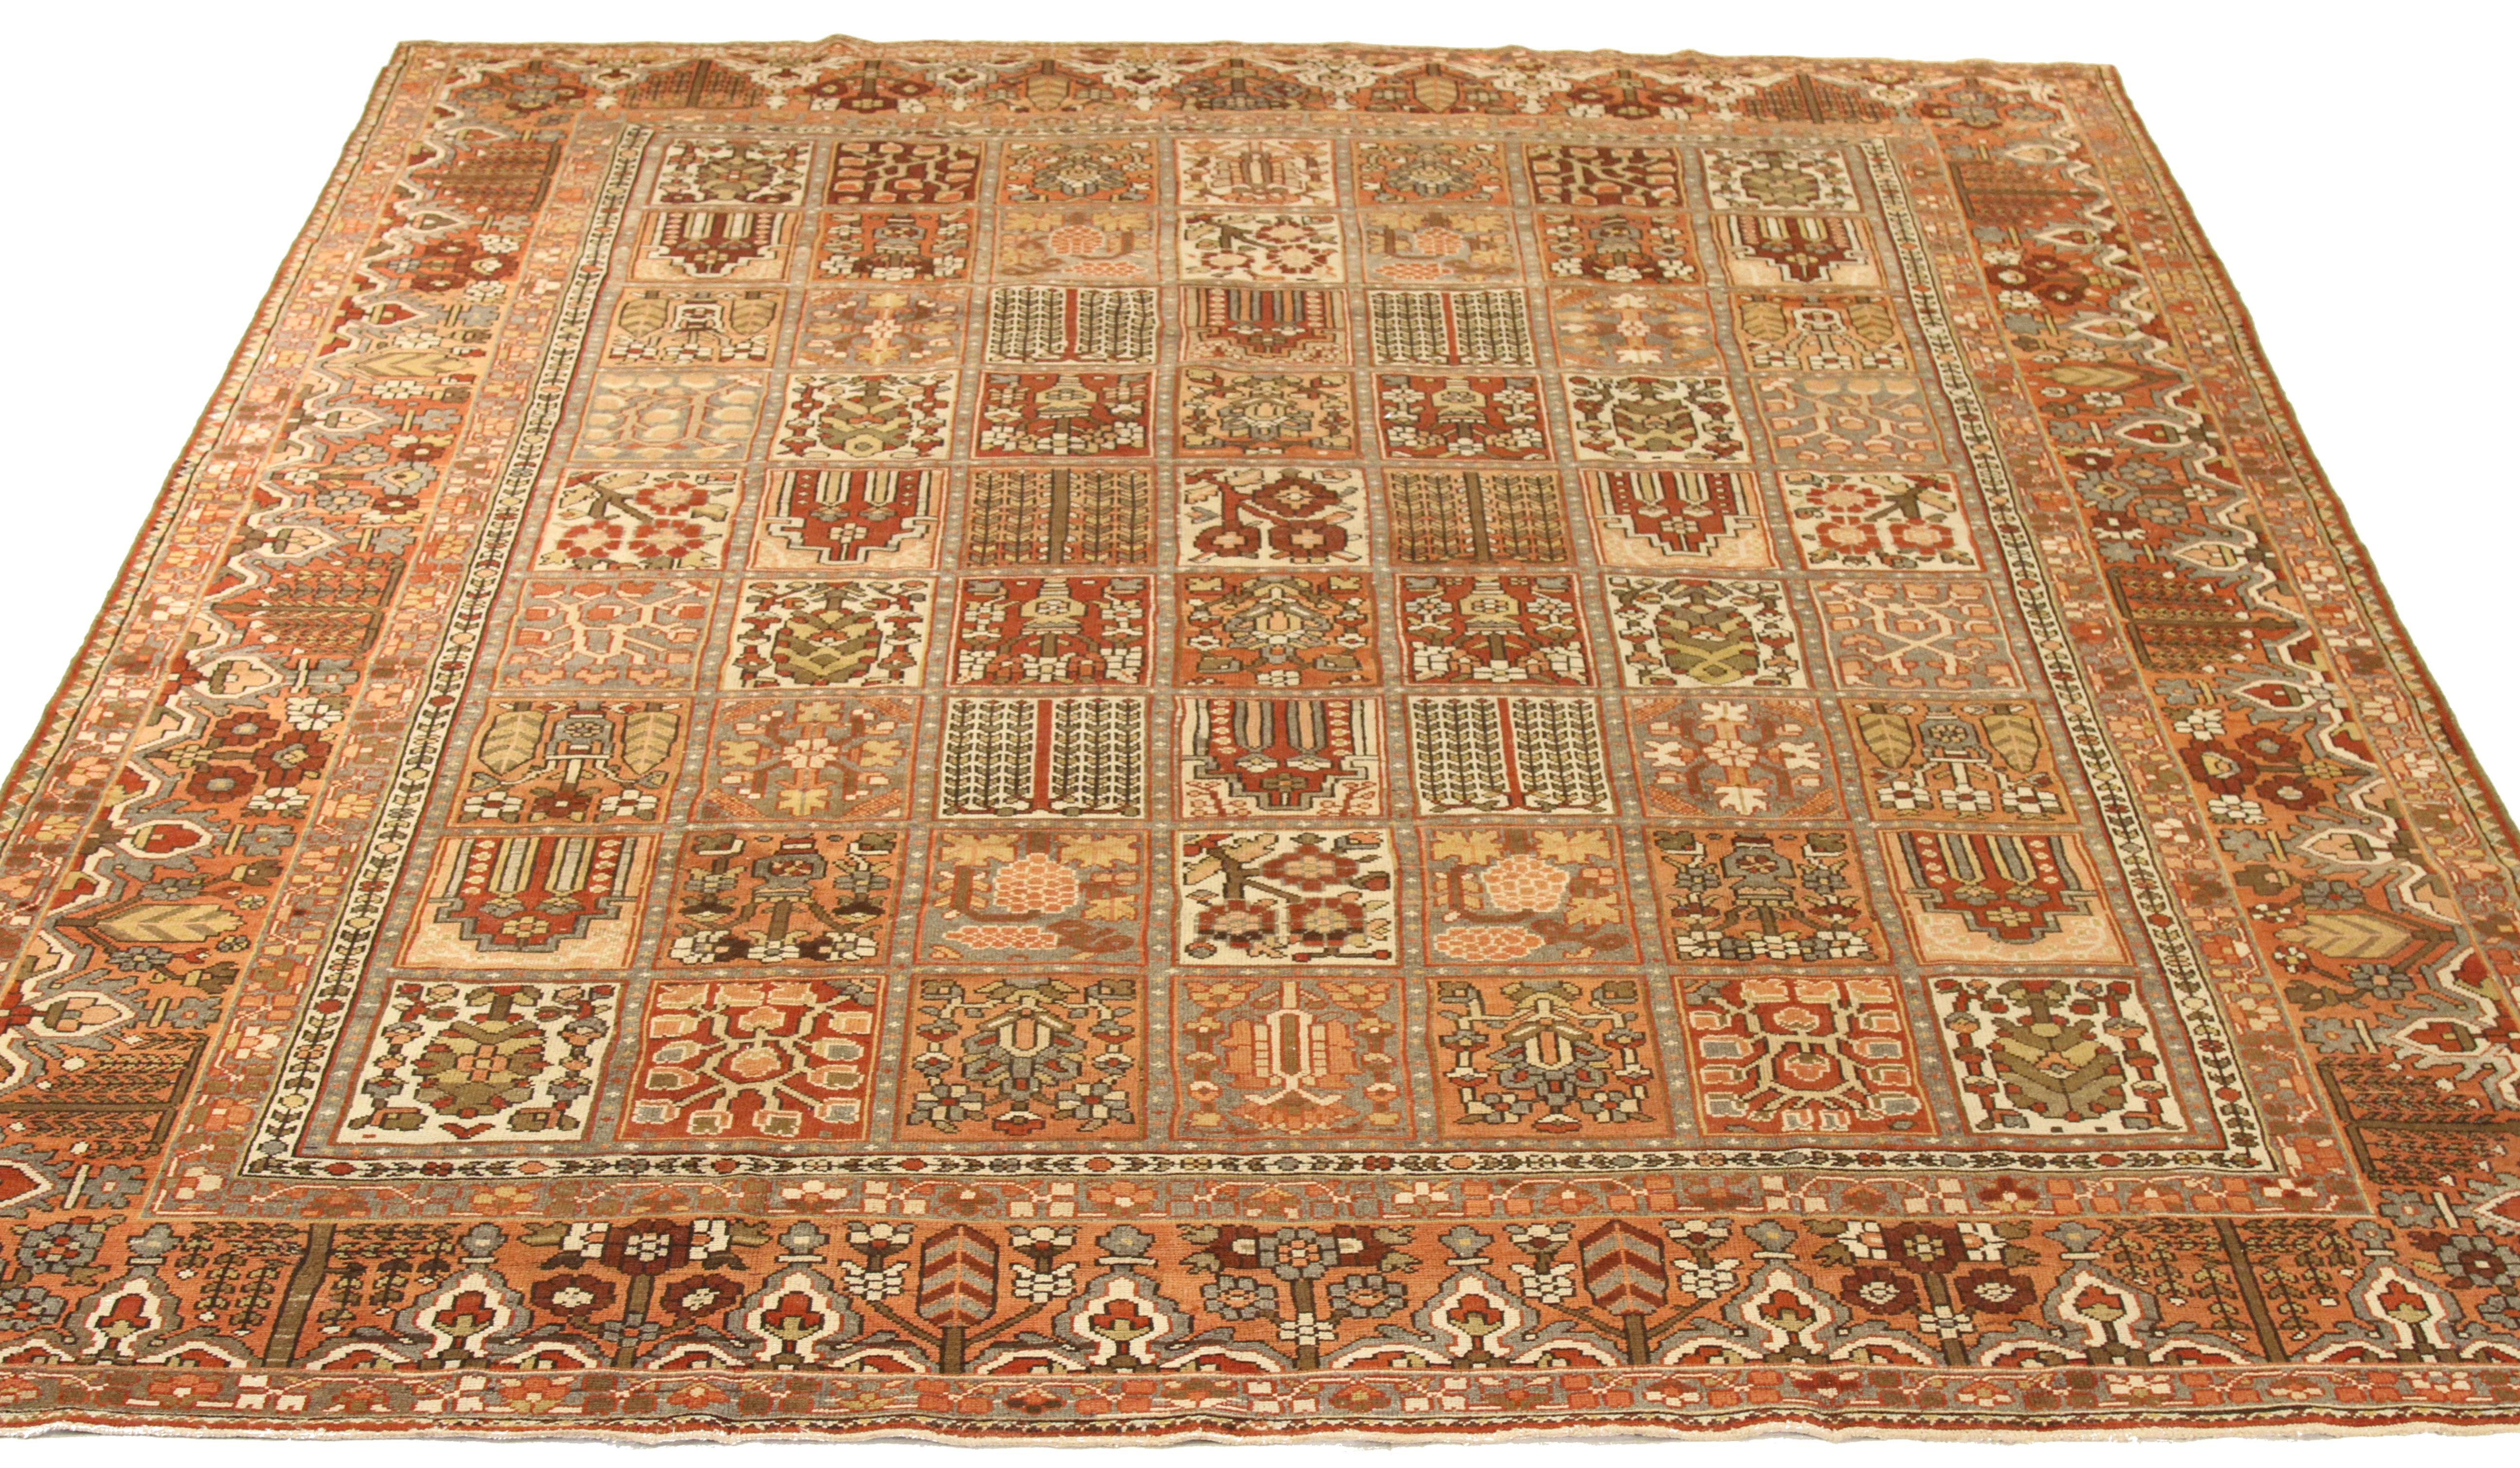 Antique handwoven mid-20th century Persian area rug made from fine wool and all-natural vegetable dyes that are safe for people and pets. This lovely piece features a rich field of tribal details in various colors which is the traditional weaving